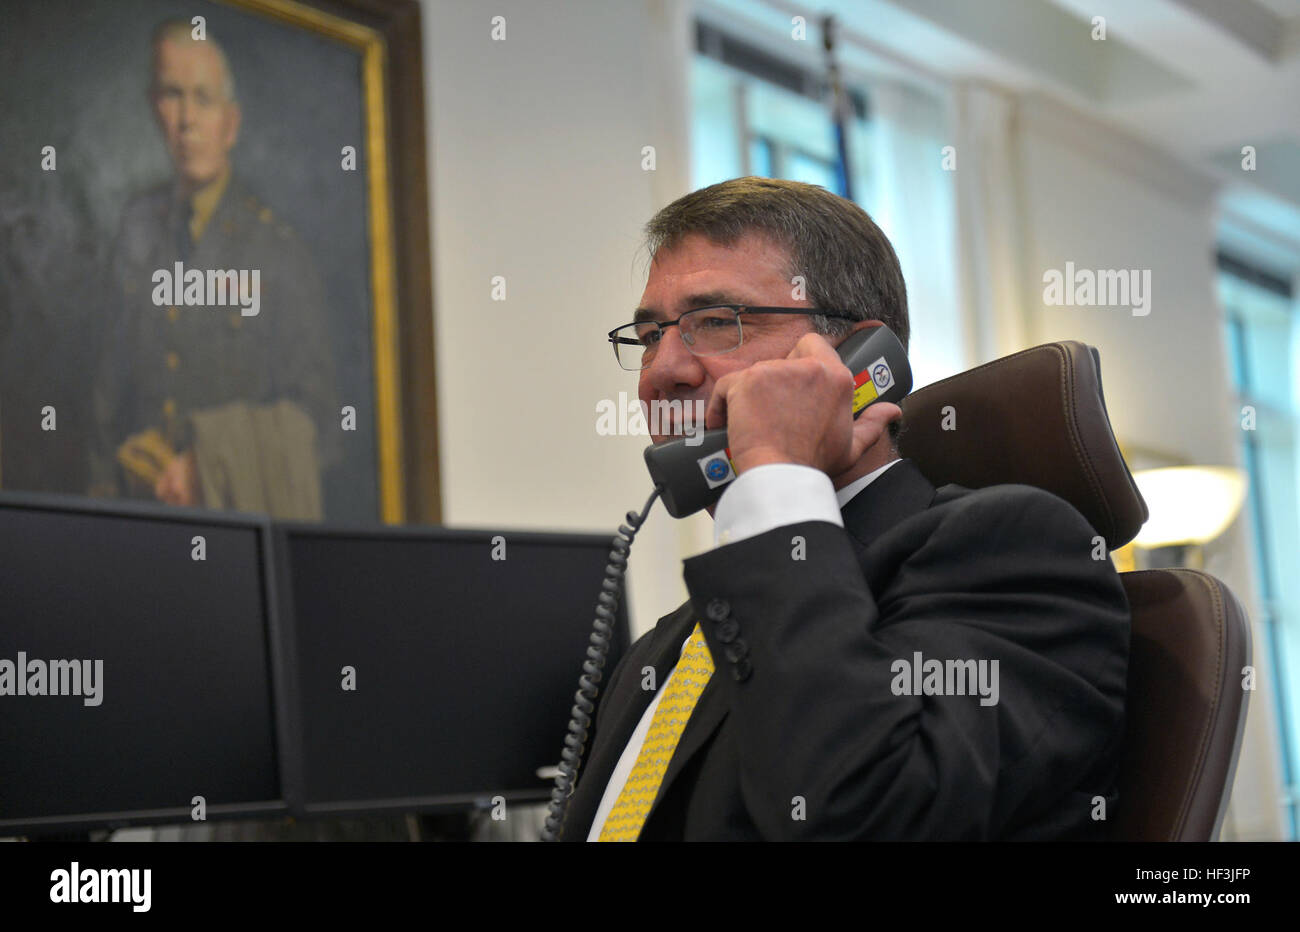 Secretary of Defense Ash Carter speaks by phone with Army 1st Lt. Shaye Haver and 1st Lt. Kristen Griest to congratulate the two for their recent graduation from the rigorous Army Ranger School from his office at the Pentagon, Aug. 20, 2015. Haver and Griest are the first women to successfully complete the course after the Army began allowing women to participate in the elite program. (DOD Photo by Glenn Fawcett/Released) Secretary of defense congratulates first women to graduate from US Army Ranger School 150820-D-NI589-058 Stock Photo